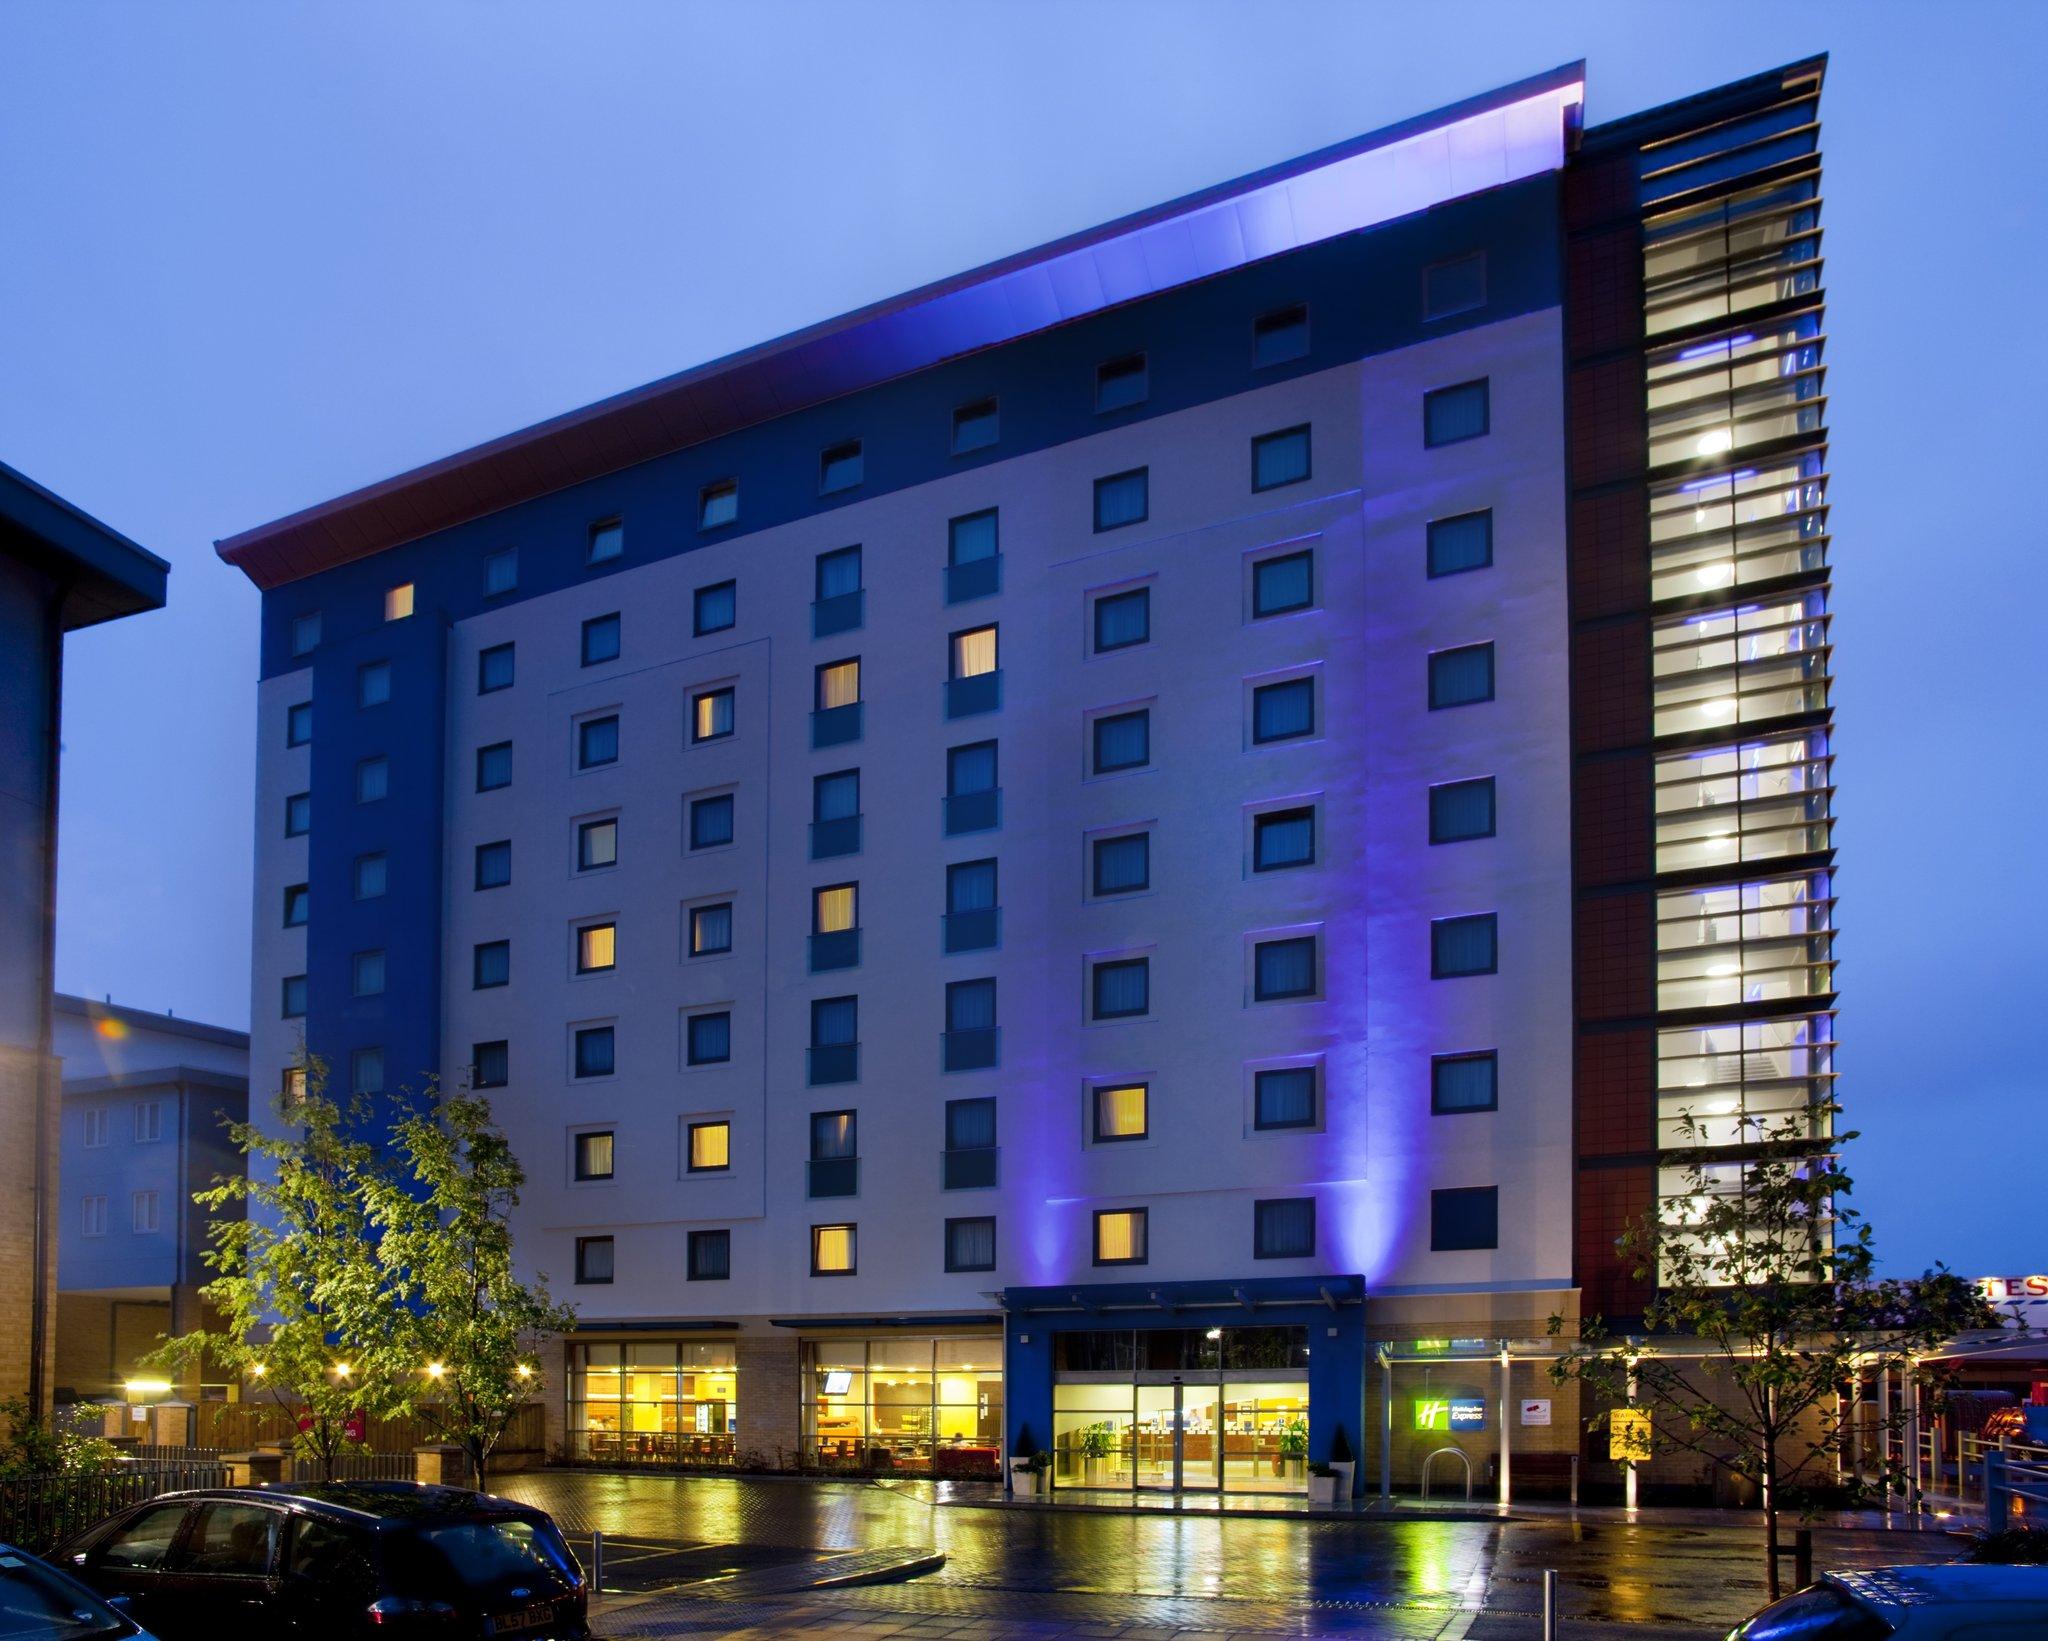 Holiday Inn Express Slough (Accepting reservations from 01st Oct, 2022) in Slough, GB1